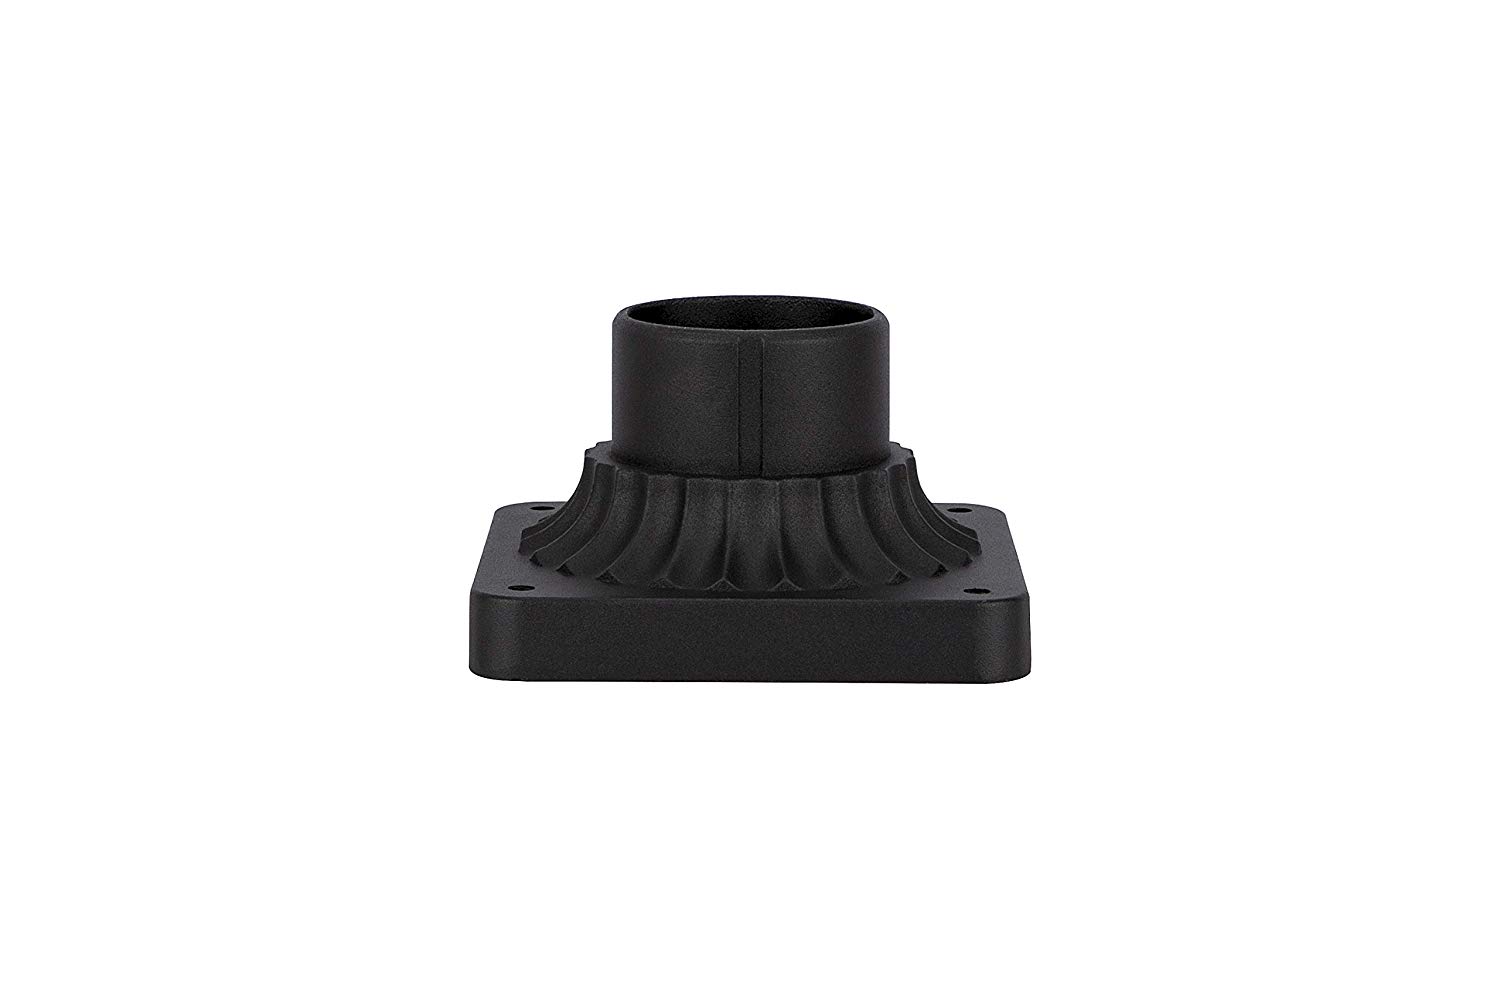 LIT-PaTH Outdoor Post Light Mounting Base, Pier Mount Base with Black Finish, 2-Pack